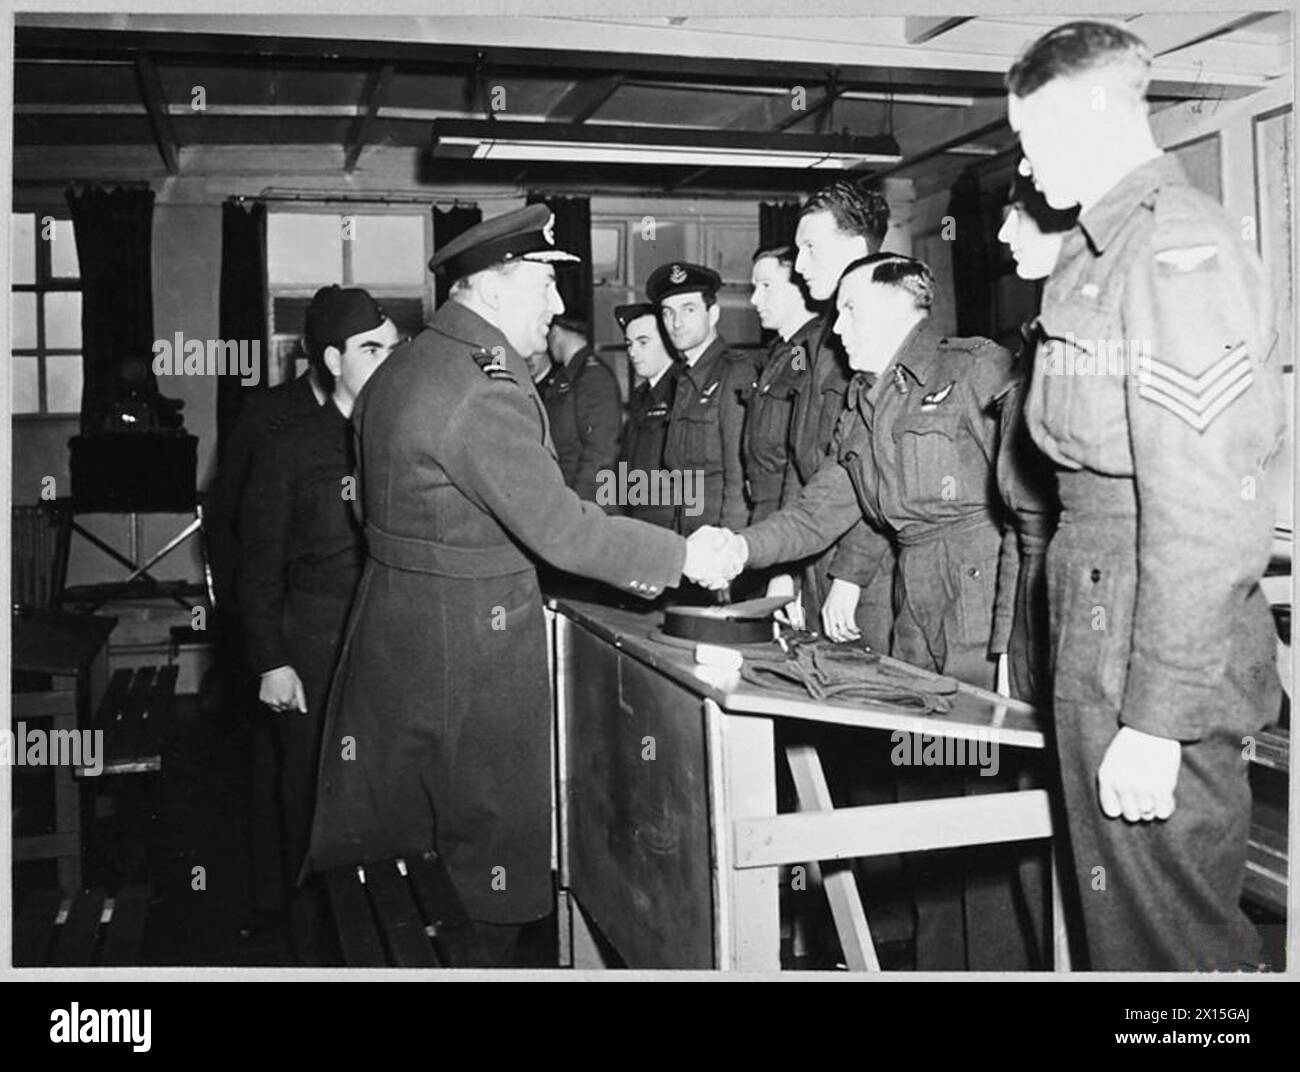 'ARIES' LEAVES FOR SOUTH AFRICA - [Pictures tie with AMB.Nos.20734 and 20737. Air Marshal Sir Arthur Coningham, Air Officer Commanding- in-Chief, Flying Training Command and the A.O.C. of No.25 Group Flying Training Command - Air Commodore C.N.H. Bilney, attended the briefing and were present when 'Aries' took off from Shawbury at 2.35 p.m. on 15th January 1946, for Thorney Island en route for South Africa. Air Commodore N.H. D�Aeth, CBE., commandant of the Empire Air Navigation School at Shawbury, flew as officer-in-charge of the mission. The captain of the 'Aries' is Wing Commander C. Dunnic Stock Photo